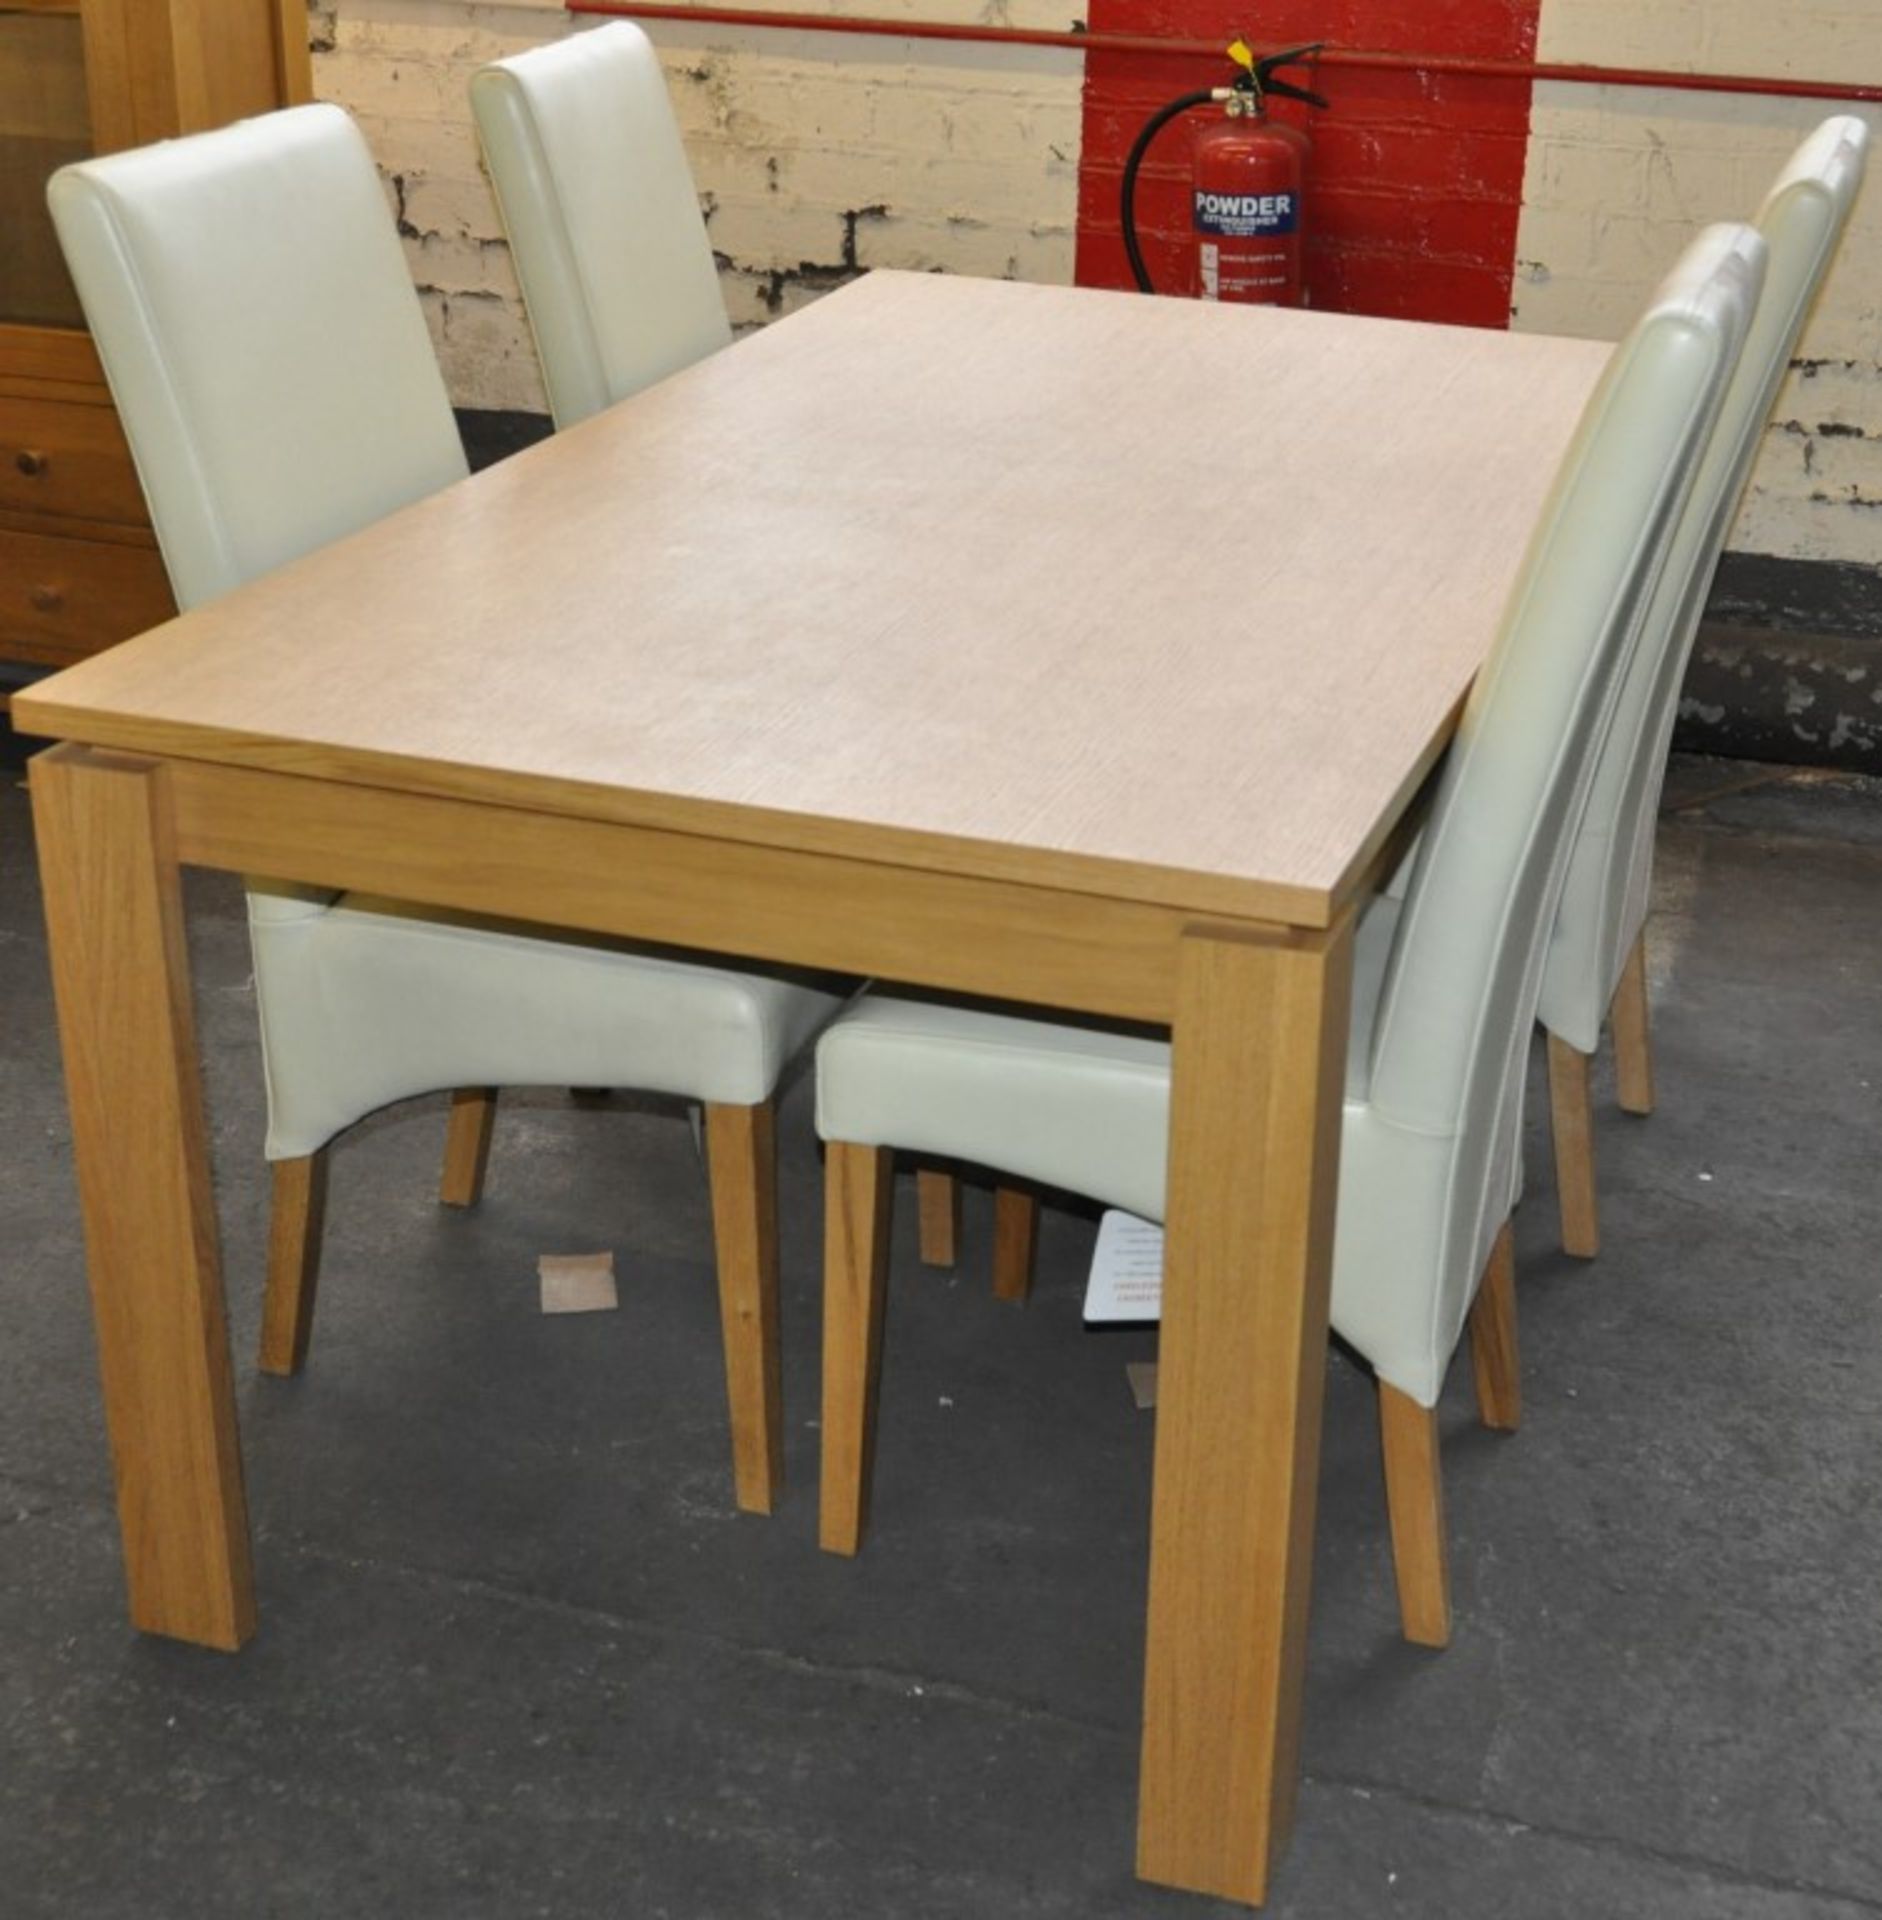 1 x Natural Oak Fixed Top Dining Table Set with 4 Luxurious Matching Chairs – Good Condition – Ex - Image 9 of 11